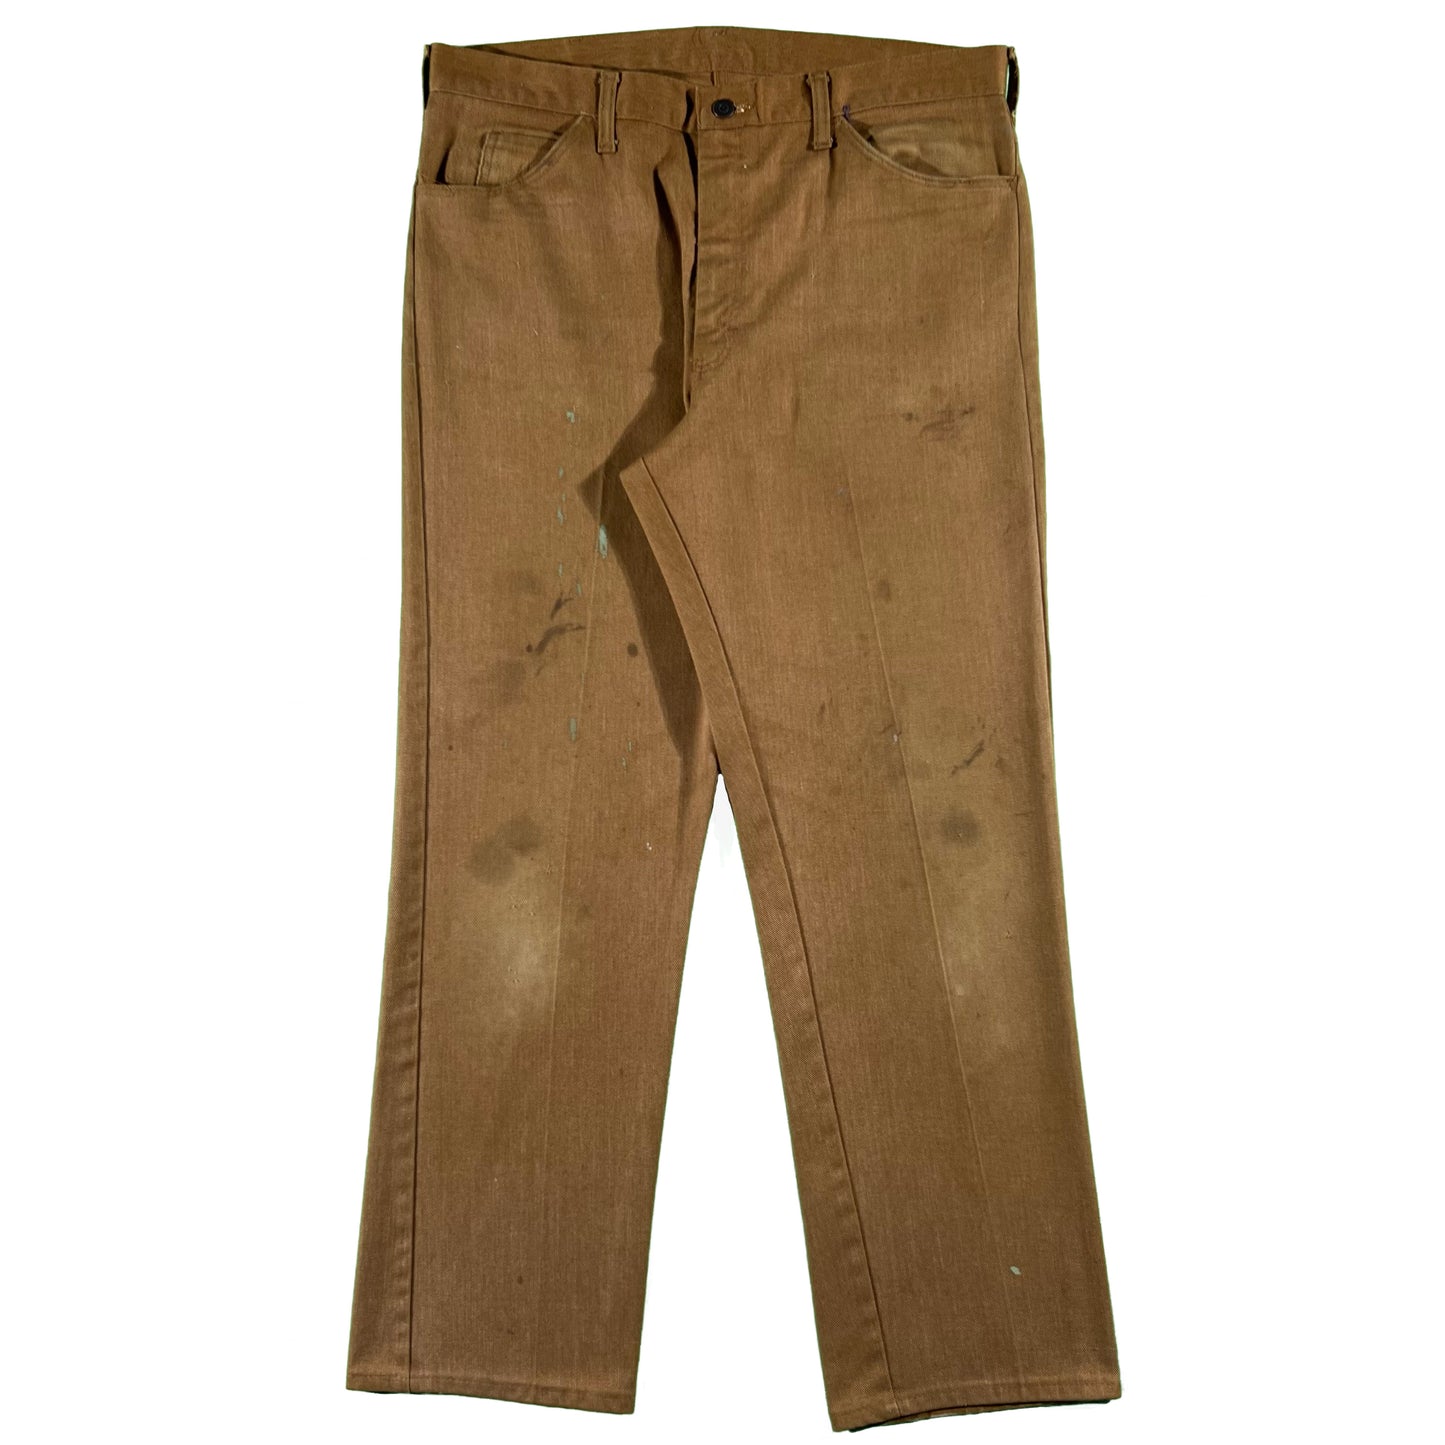 70s Faded Caramel Tan JcPenney Work Pants- 35x29.5